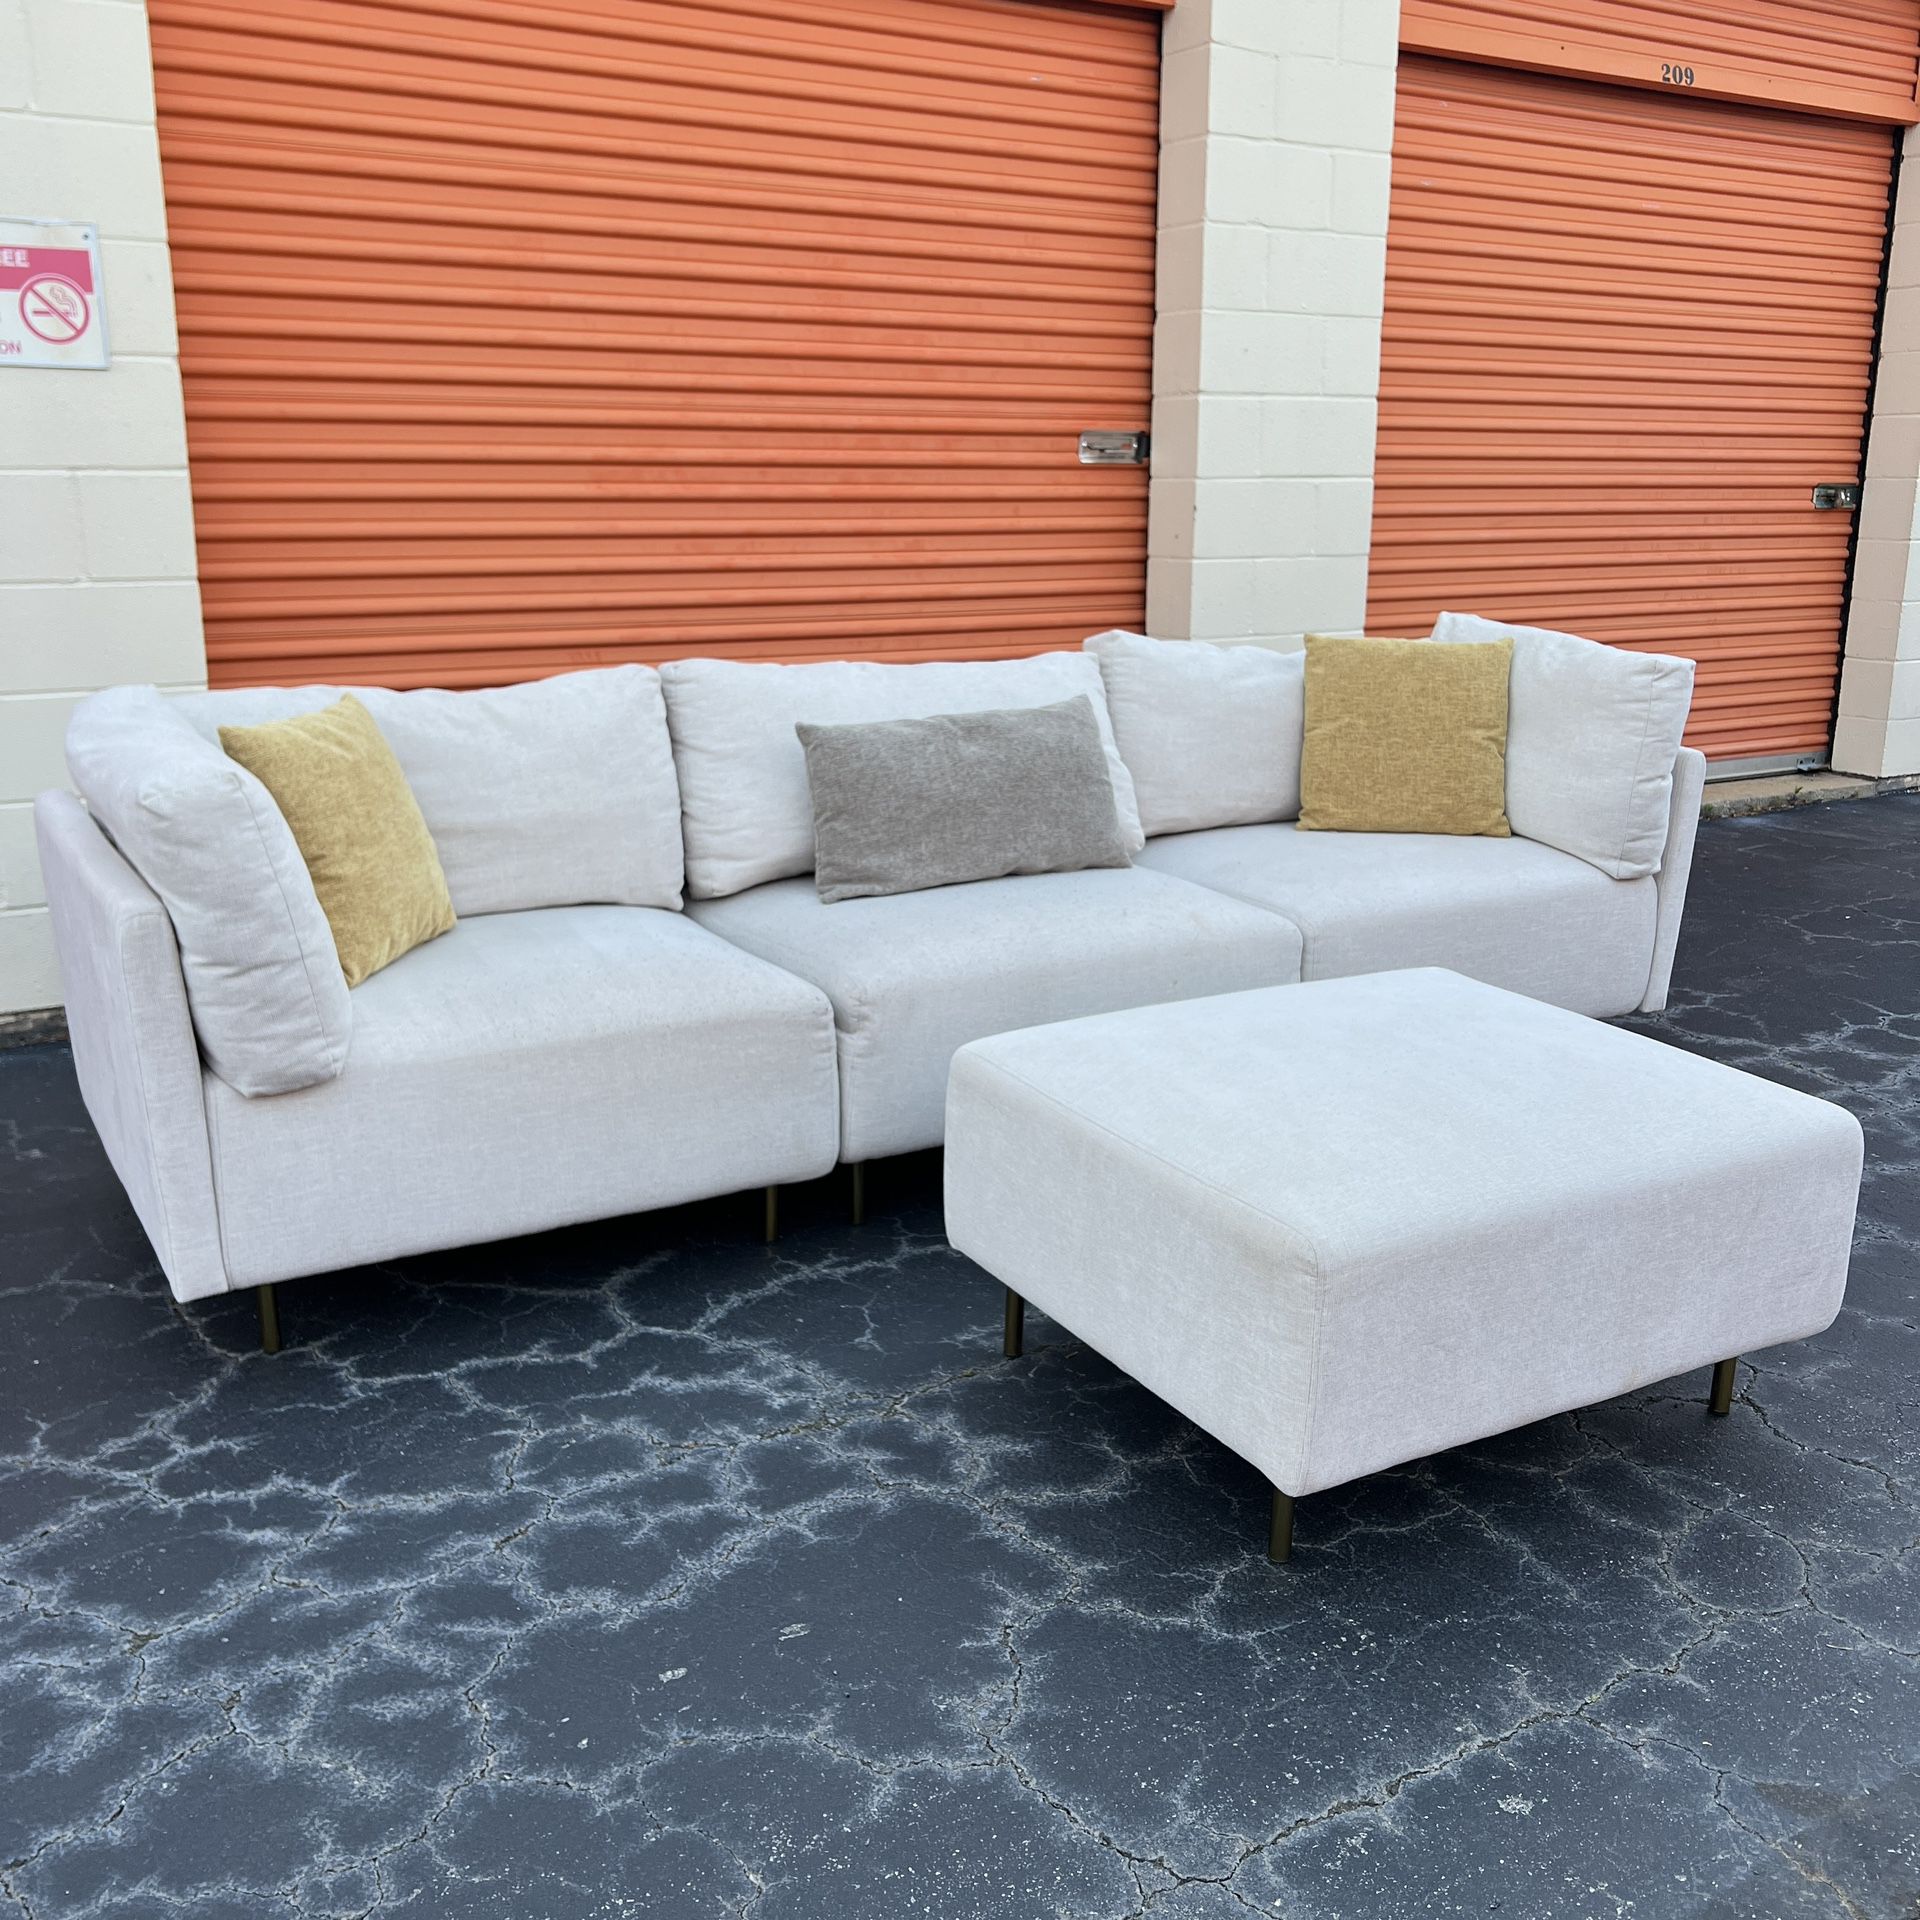 Free Delivery - Modern Modular Sectional Couch with Ottoman